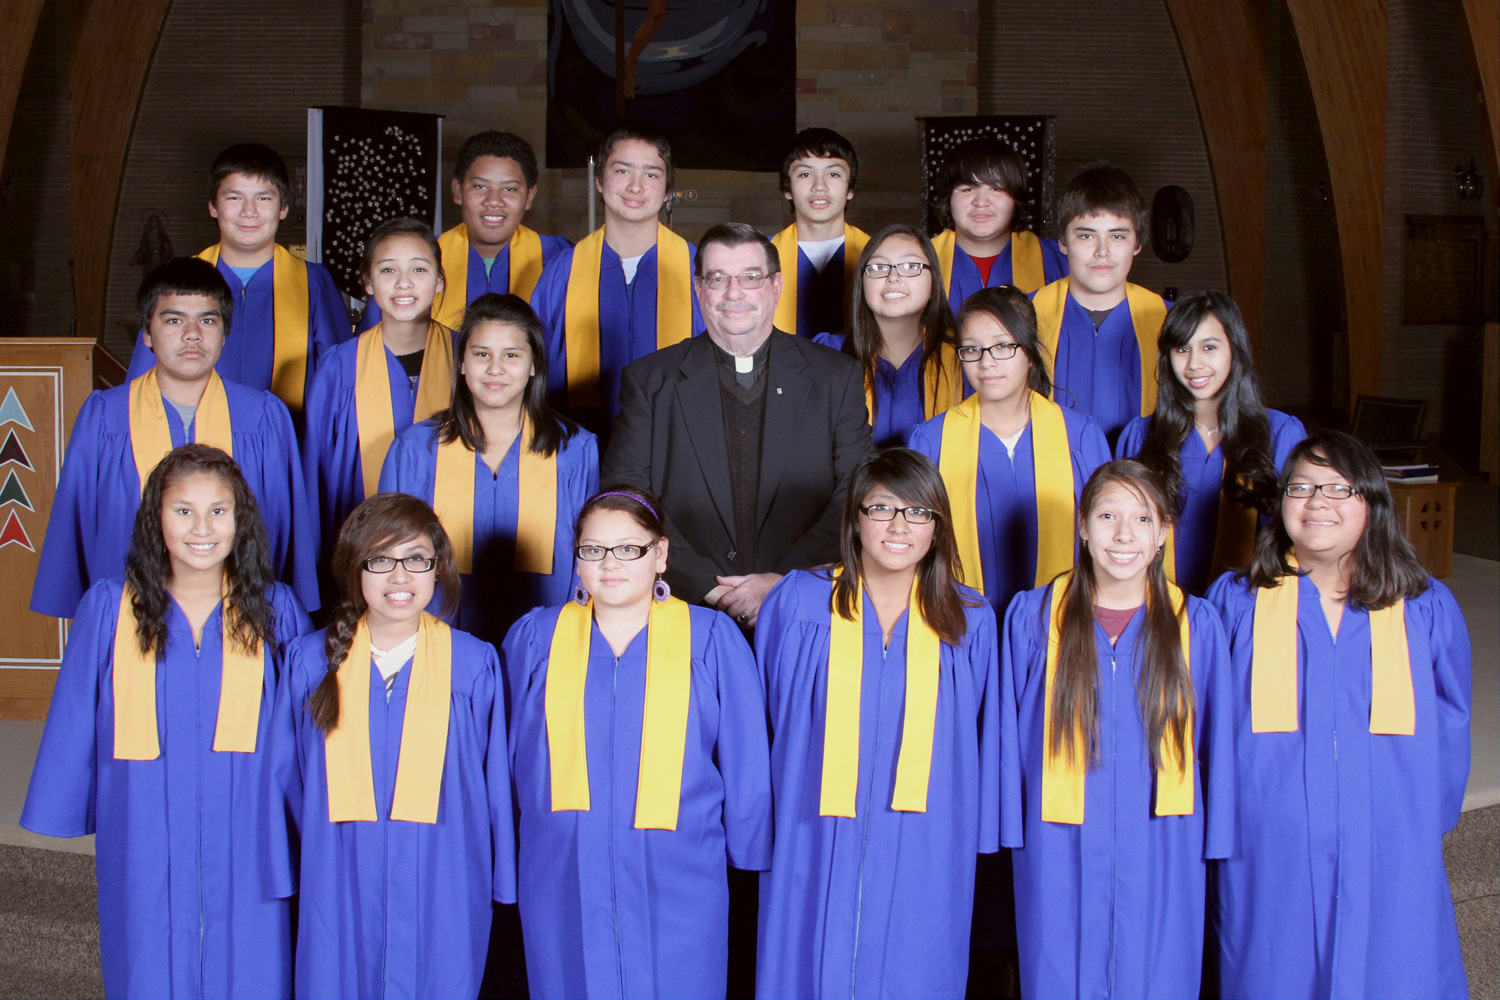 St. Joseph’s eighth graders will graduate on Friday, May 23, 2014. 